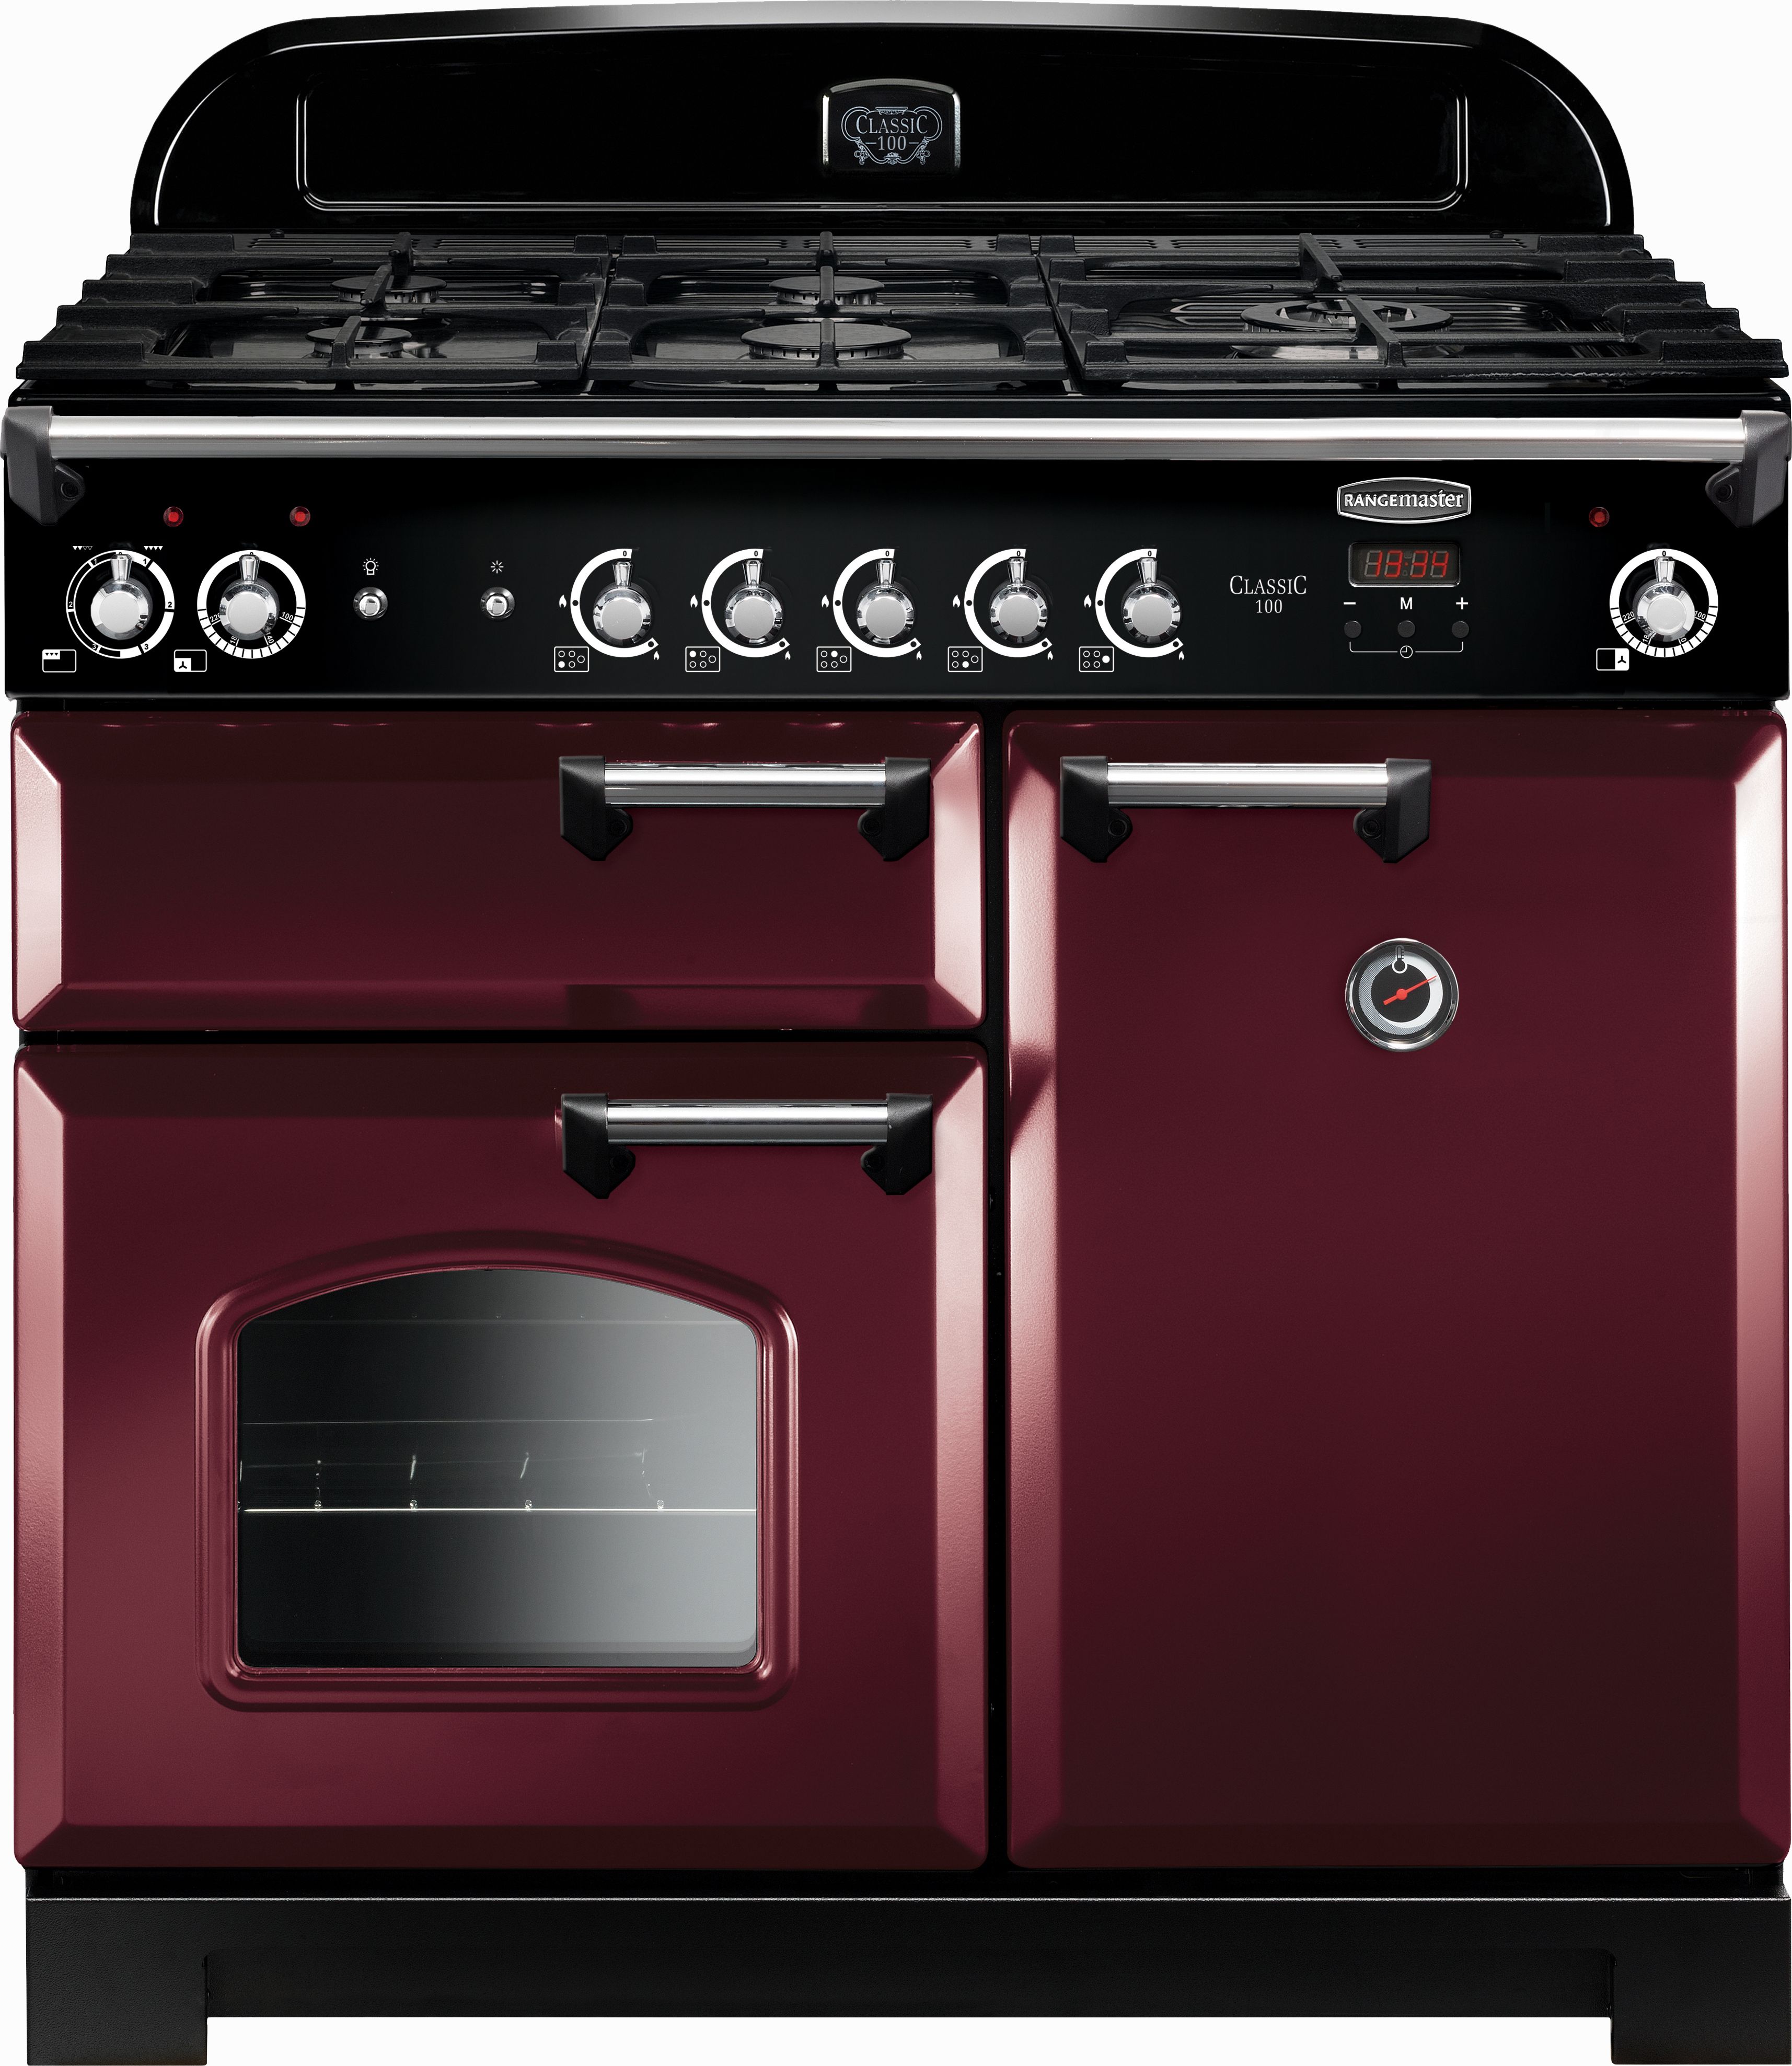 Rangemaster Classic CLA100DFFCY/C 100cm Dual Fuel Range Cooker - Cranberry / Chrome - A/A Rated, Red